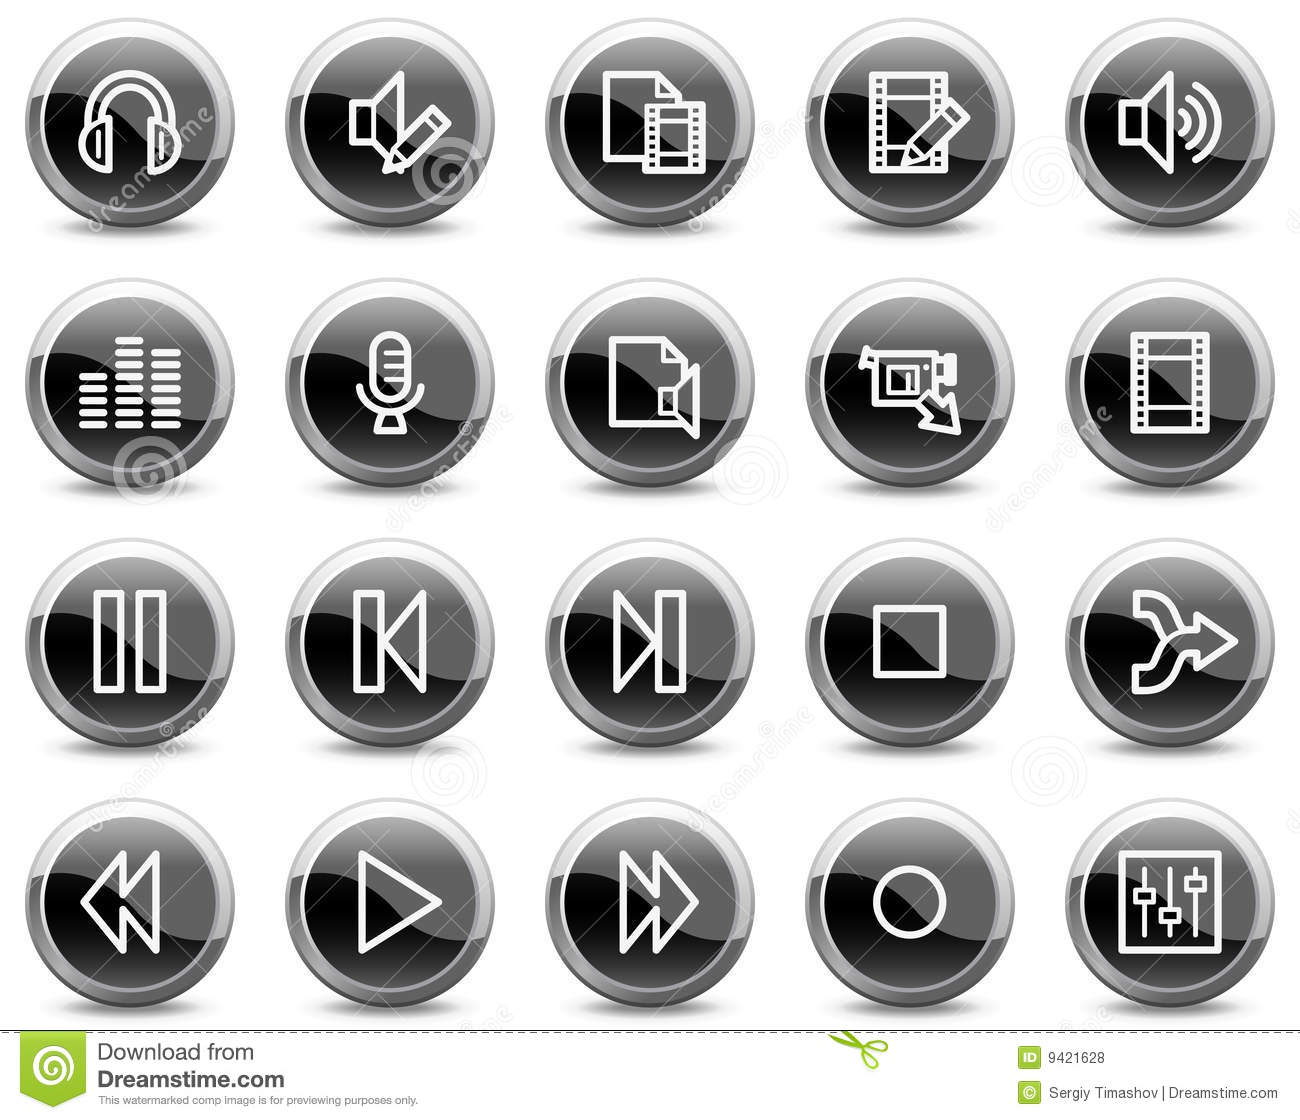 15 Editable Web Buttons Icons Images